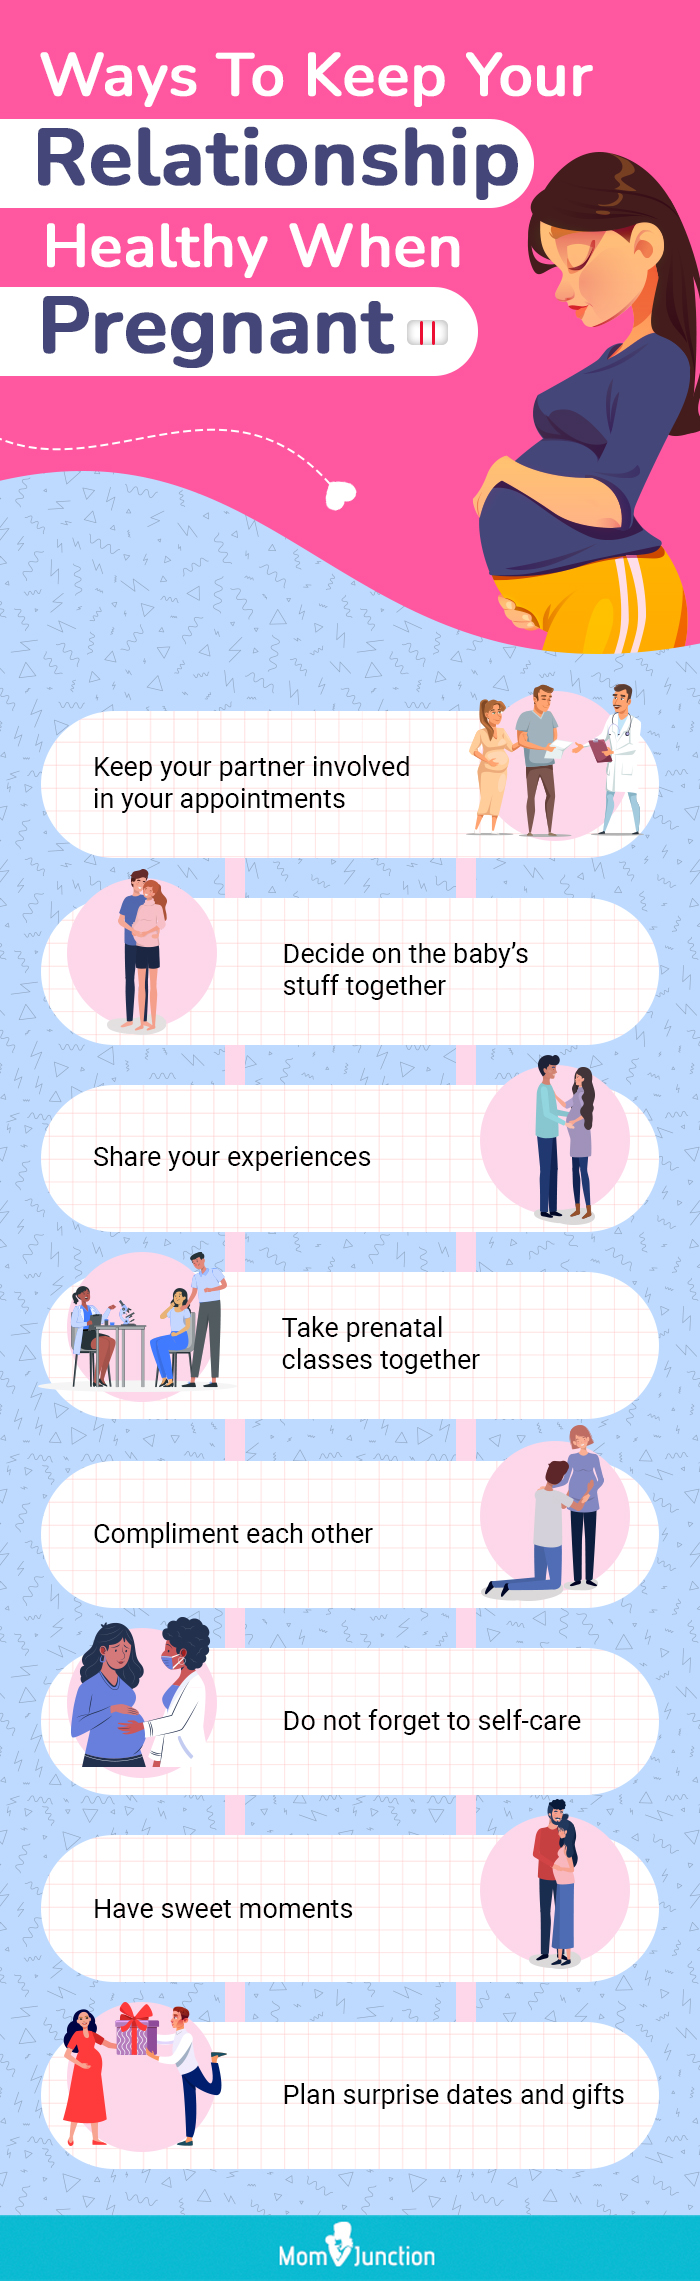 ways to keep your relationship healthy when pregnant (infographic)